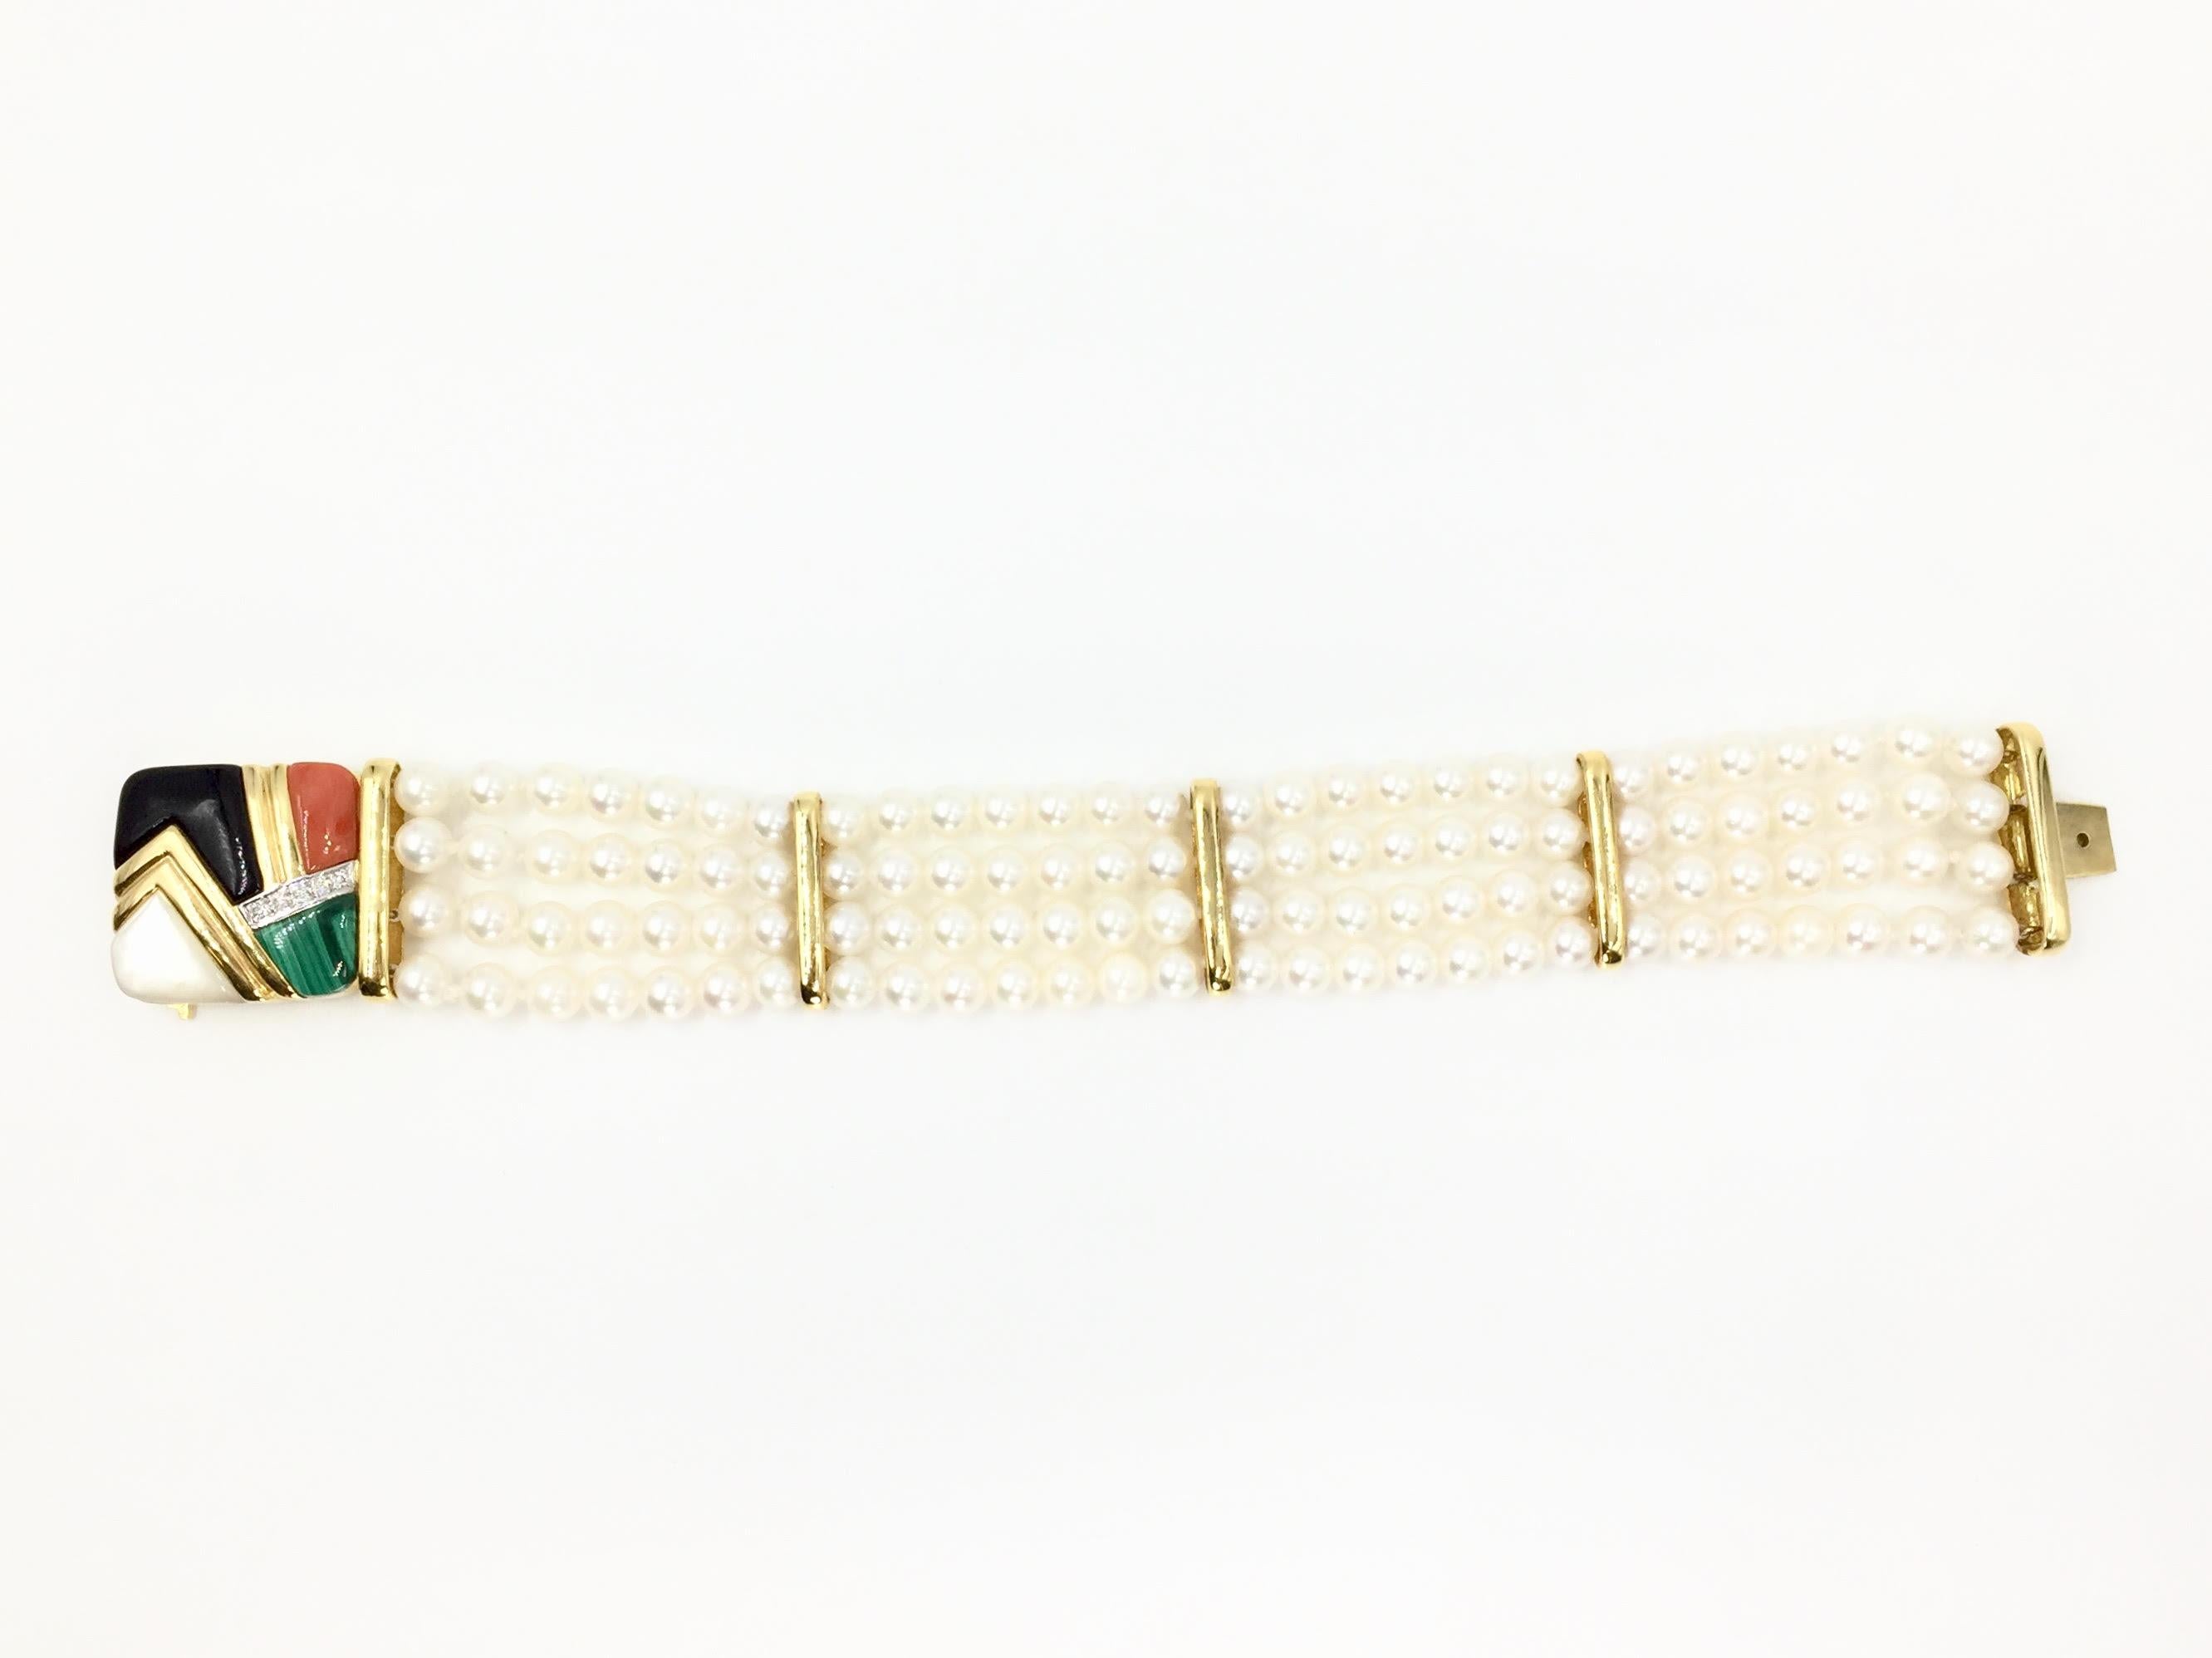 Asch Grossbardt 14 karat yellow gold four strand white cultured pearl bracelet featuring a gorgeous clasp with diamonds and expertly laid malachite, coral, onyx and mother of pearl. Stones on clasp are in excellent condition, free of cracks, chips